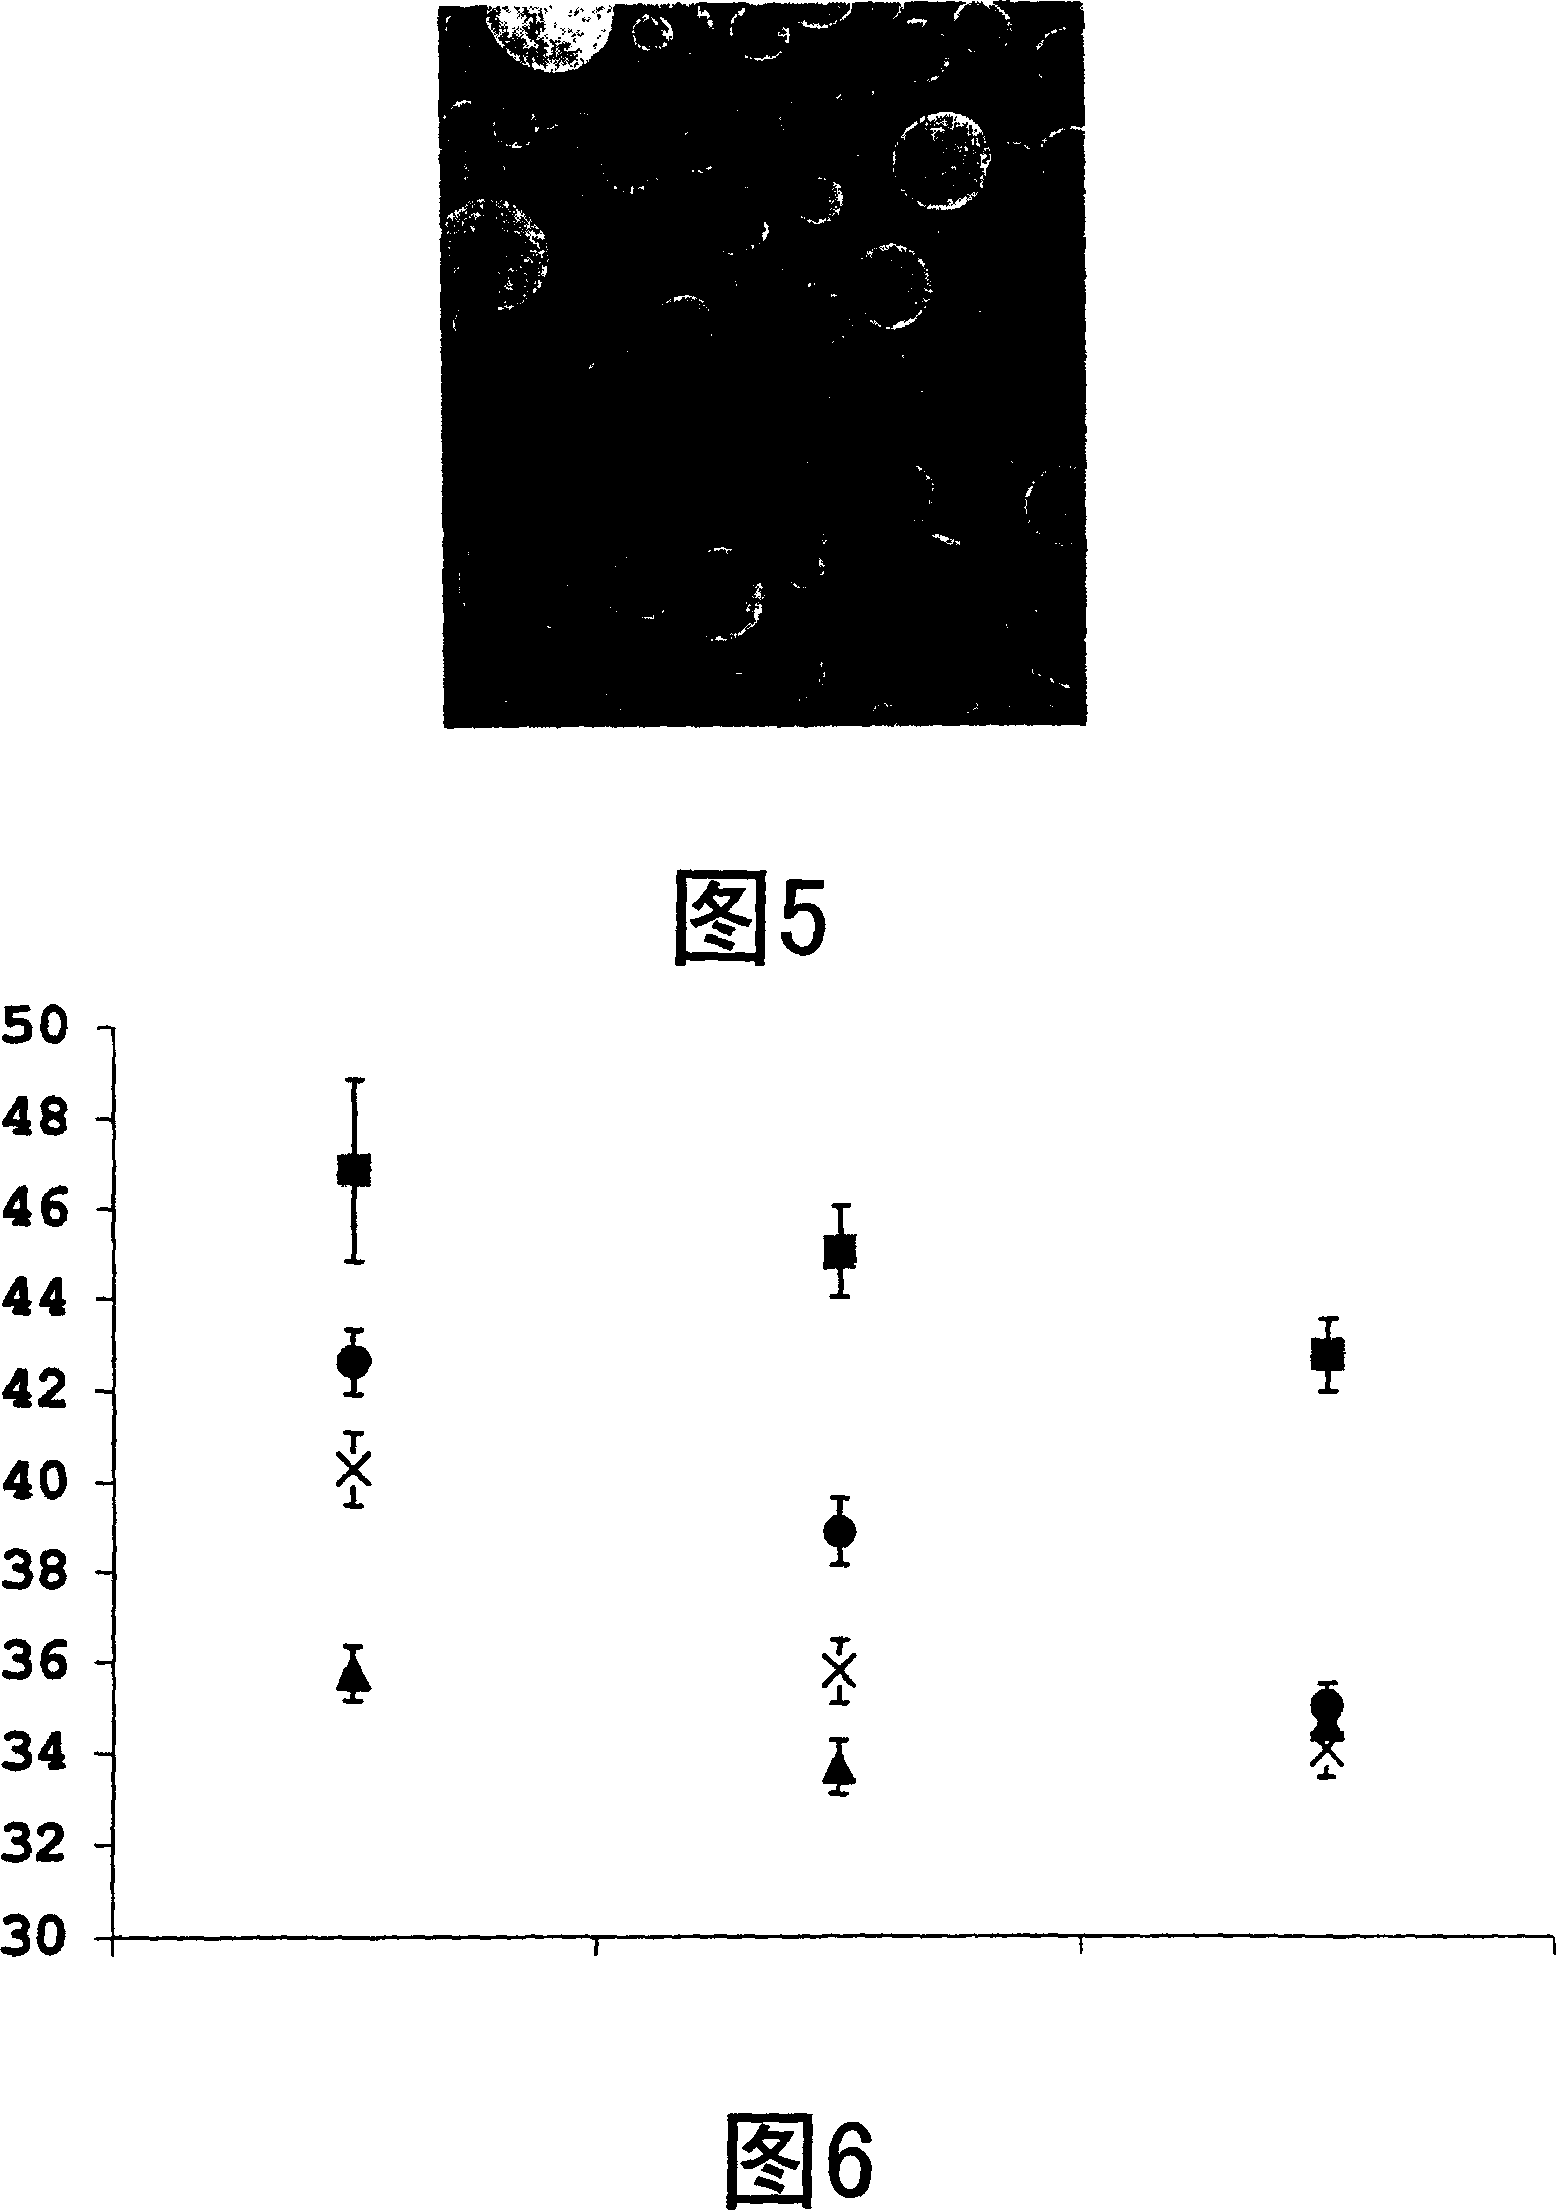 Fumed silica for use as auxiliary in pharmaceutical and cosmetic compositions